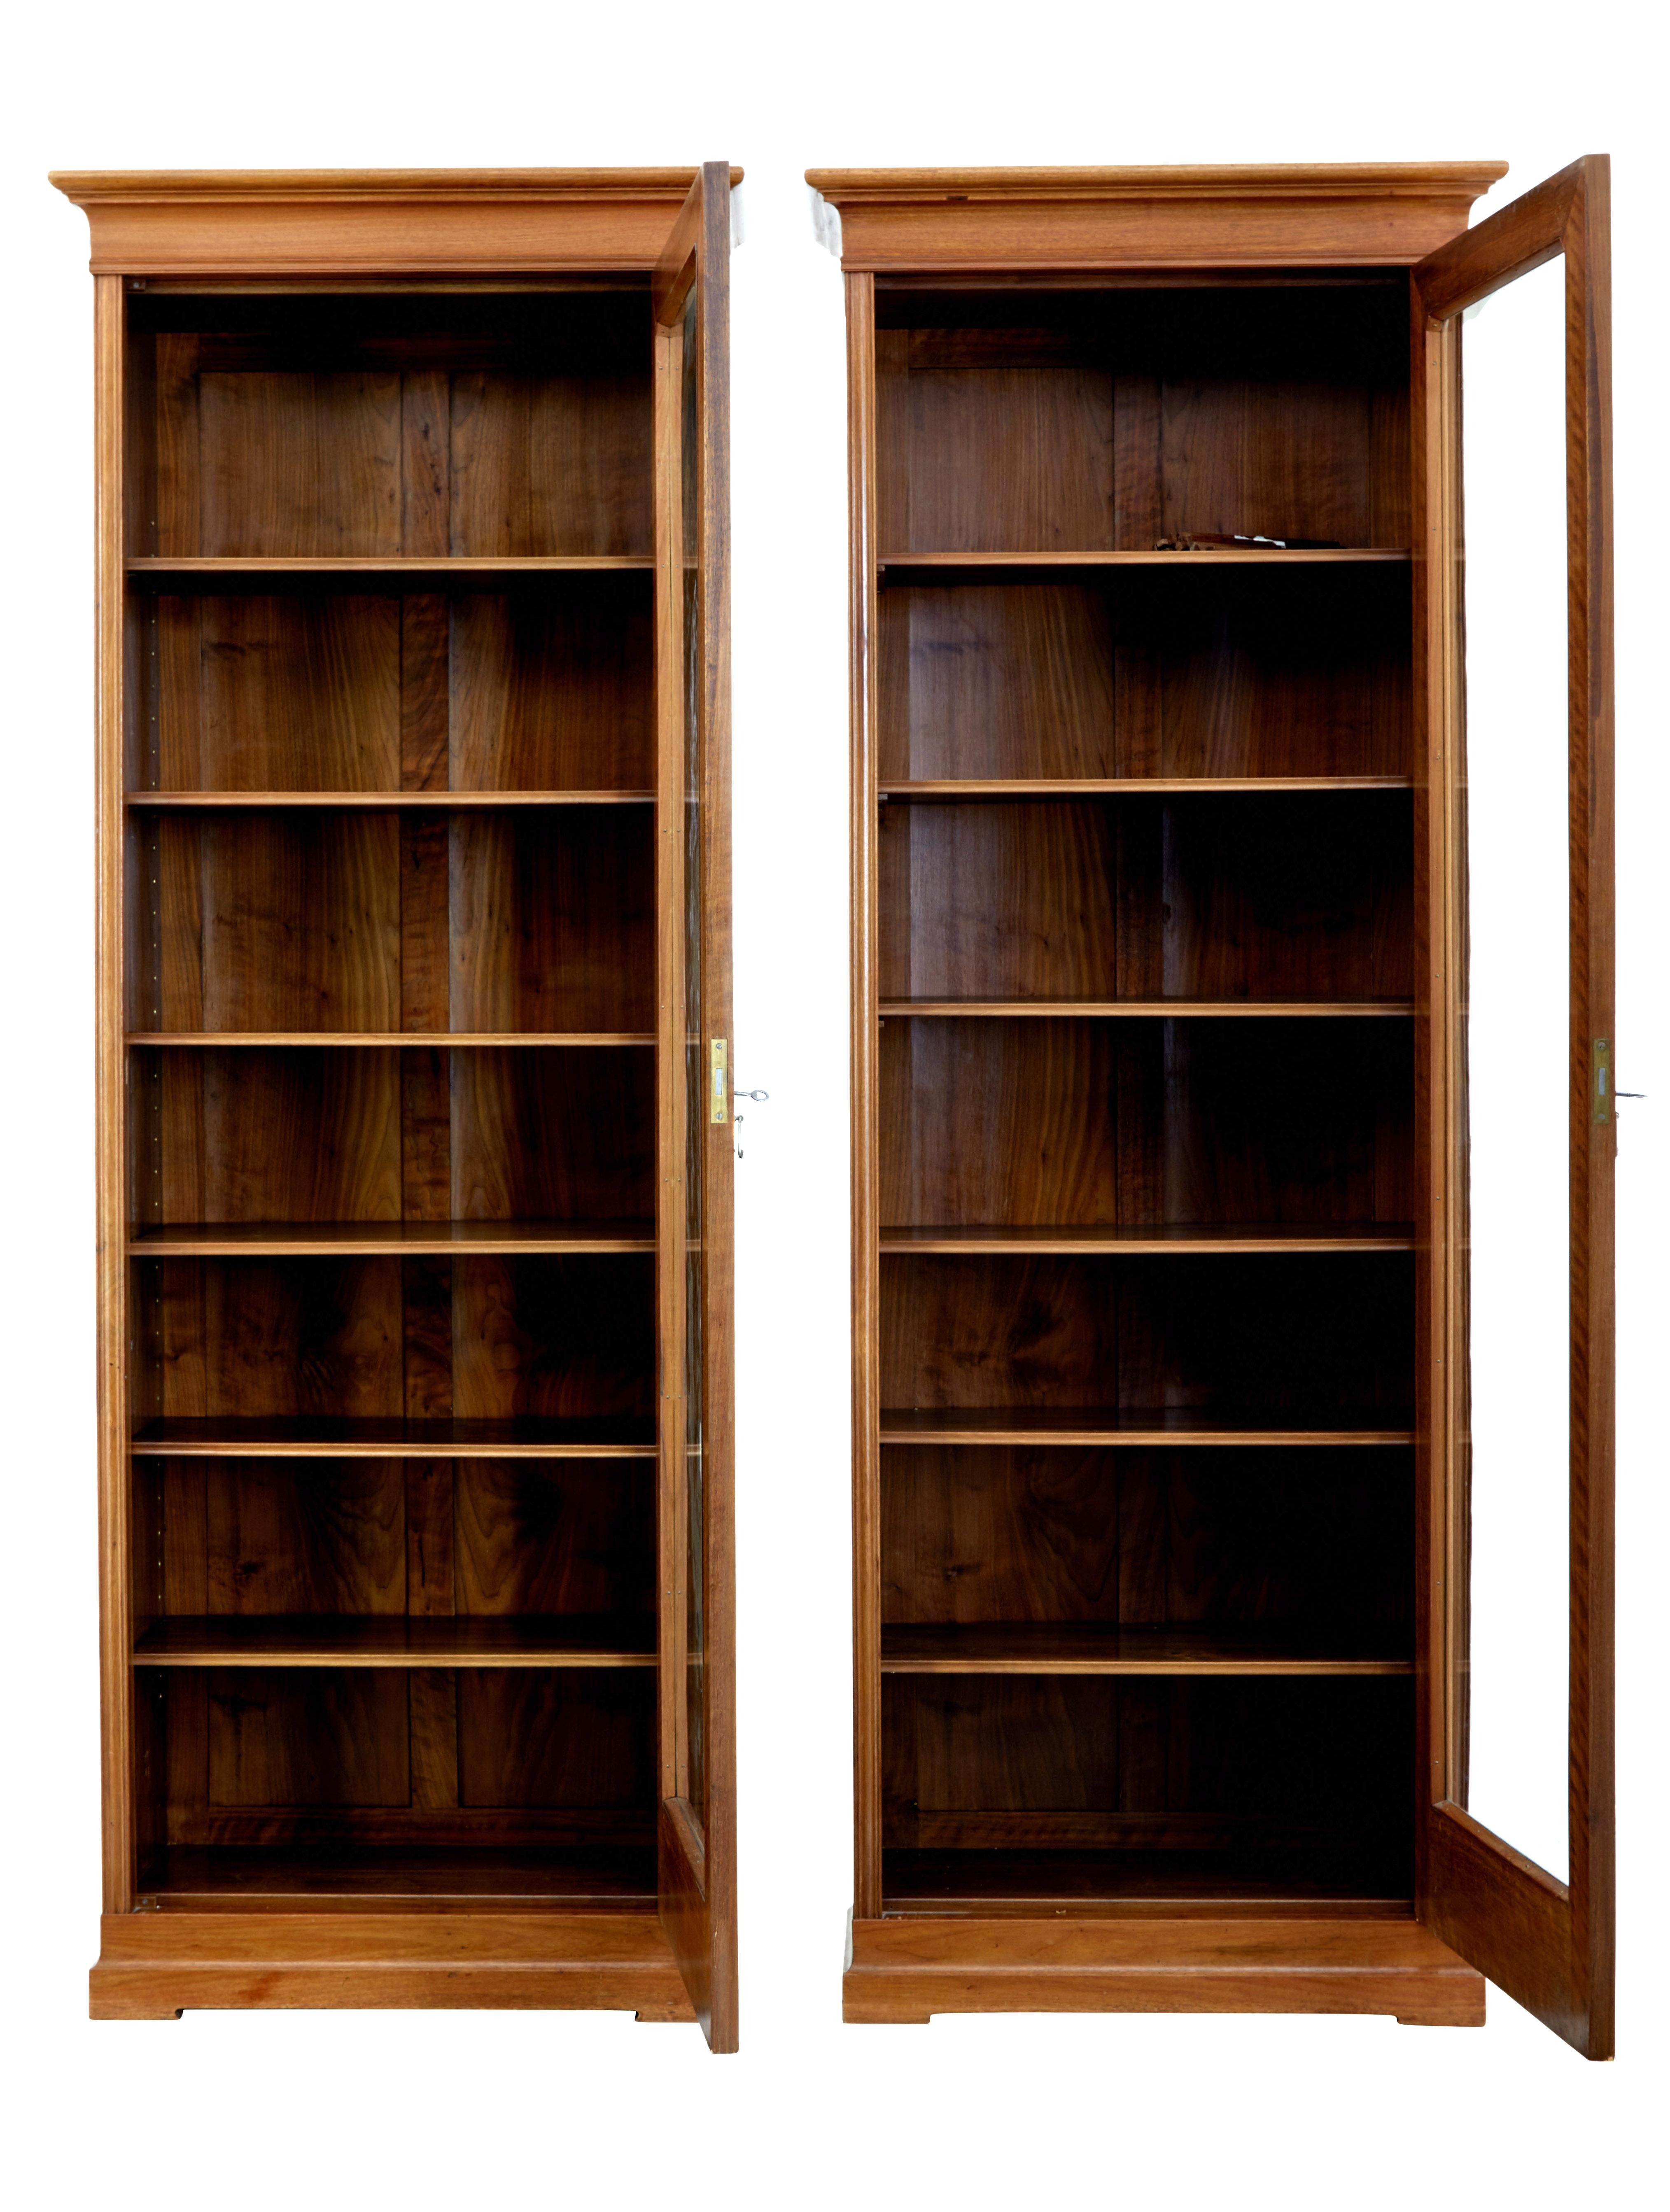 Pair of handmade walnut tall bookcase's, circa 1900.

Shaped cornice to the top. Each with a single glazed door which opens up to 6 adjustable shelves, standing on a plinth shaped base.

Elegant pieces, which due to their handmade natural the